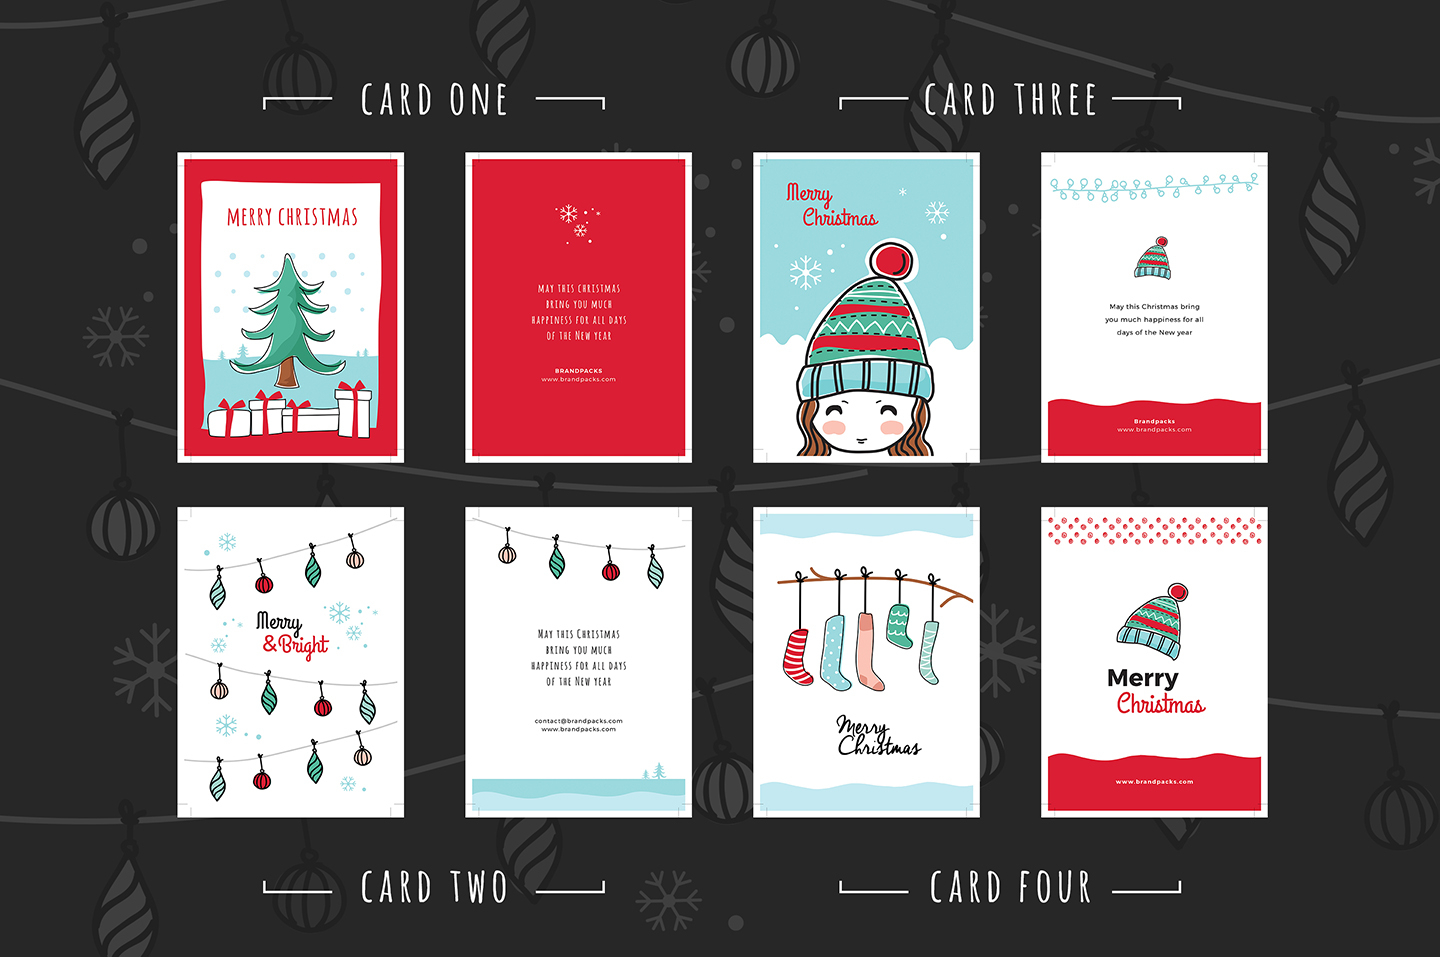 Free Christmas Card Templates For Photoshop & Illustrator Intended For Free Christmas Card Templates For Photoshop